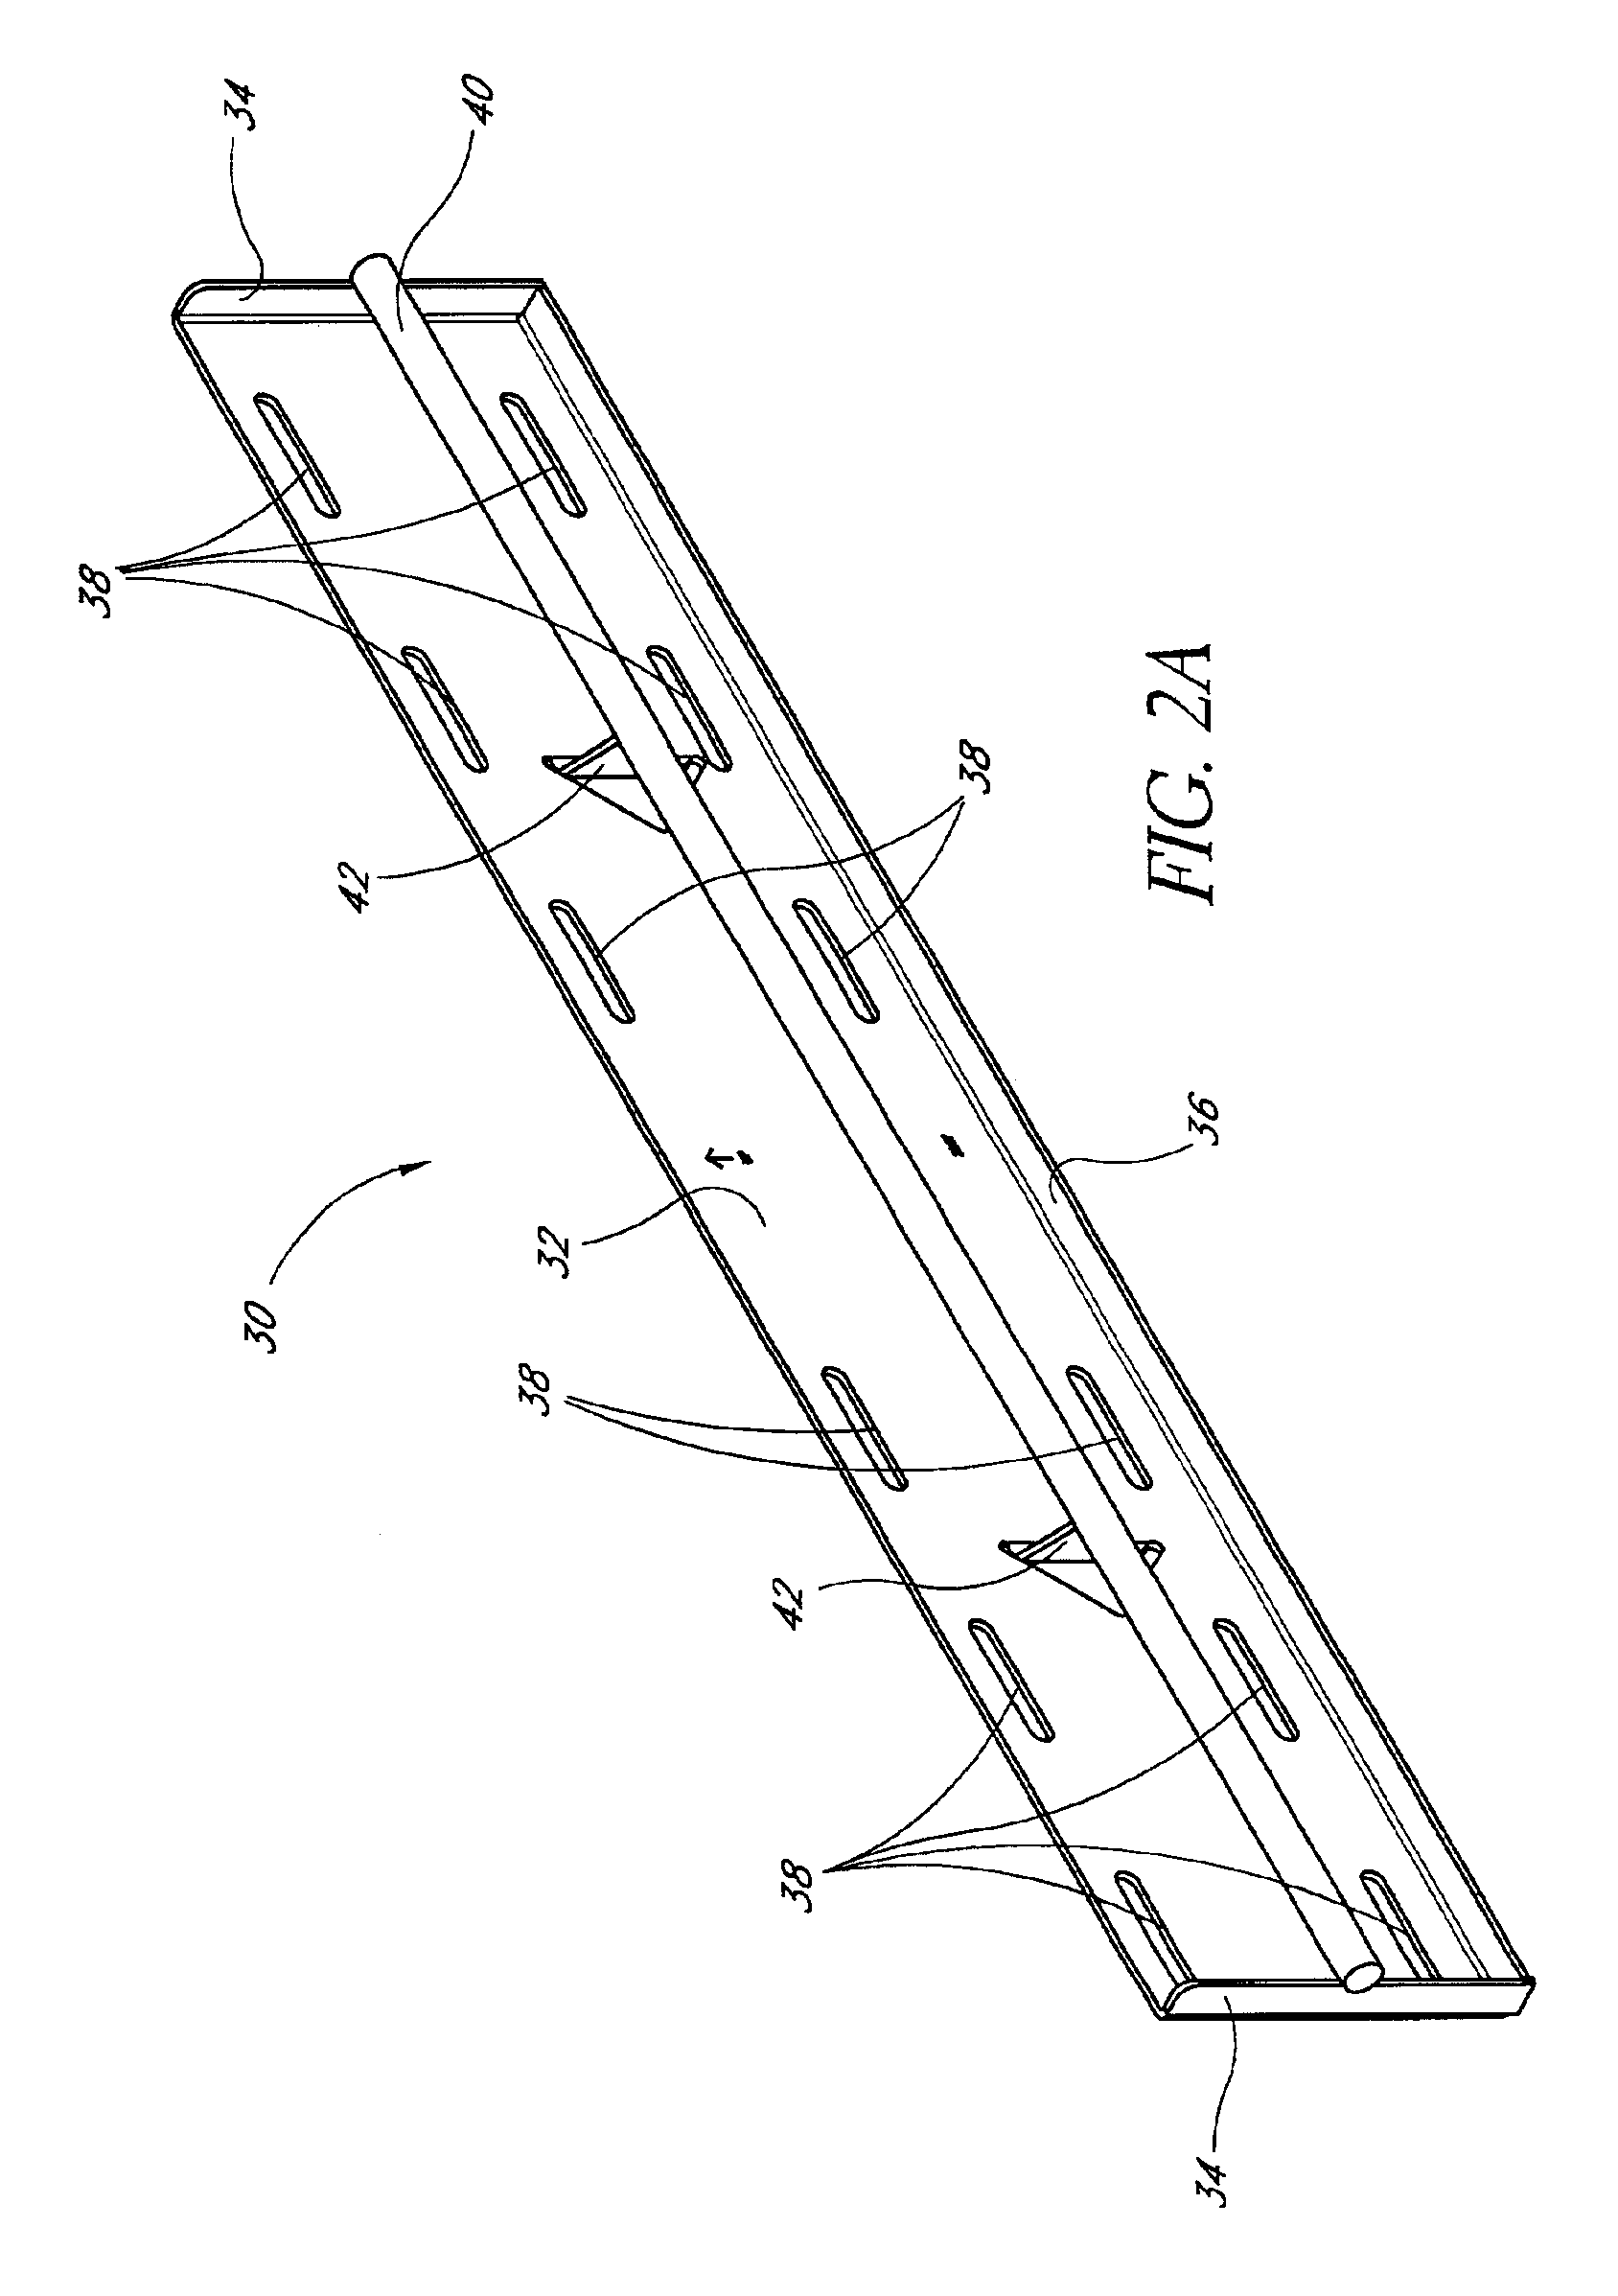 Mounting device for a flat screen display panel